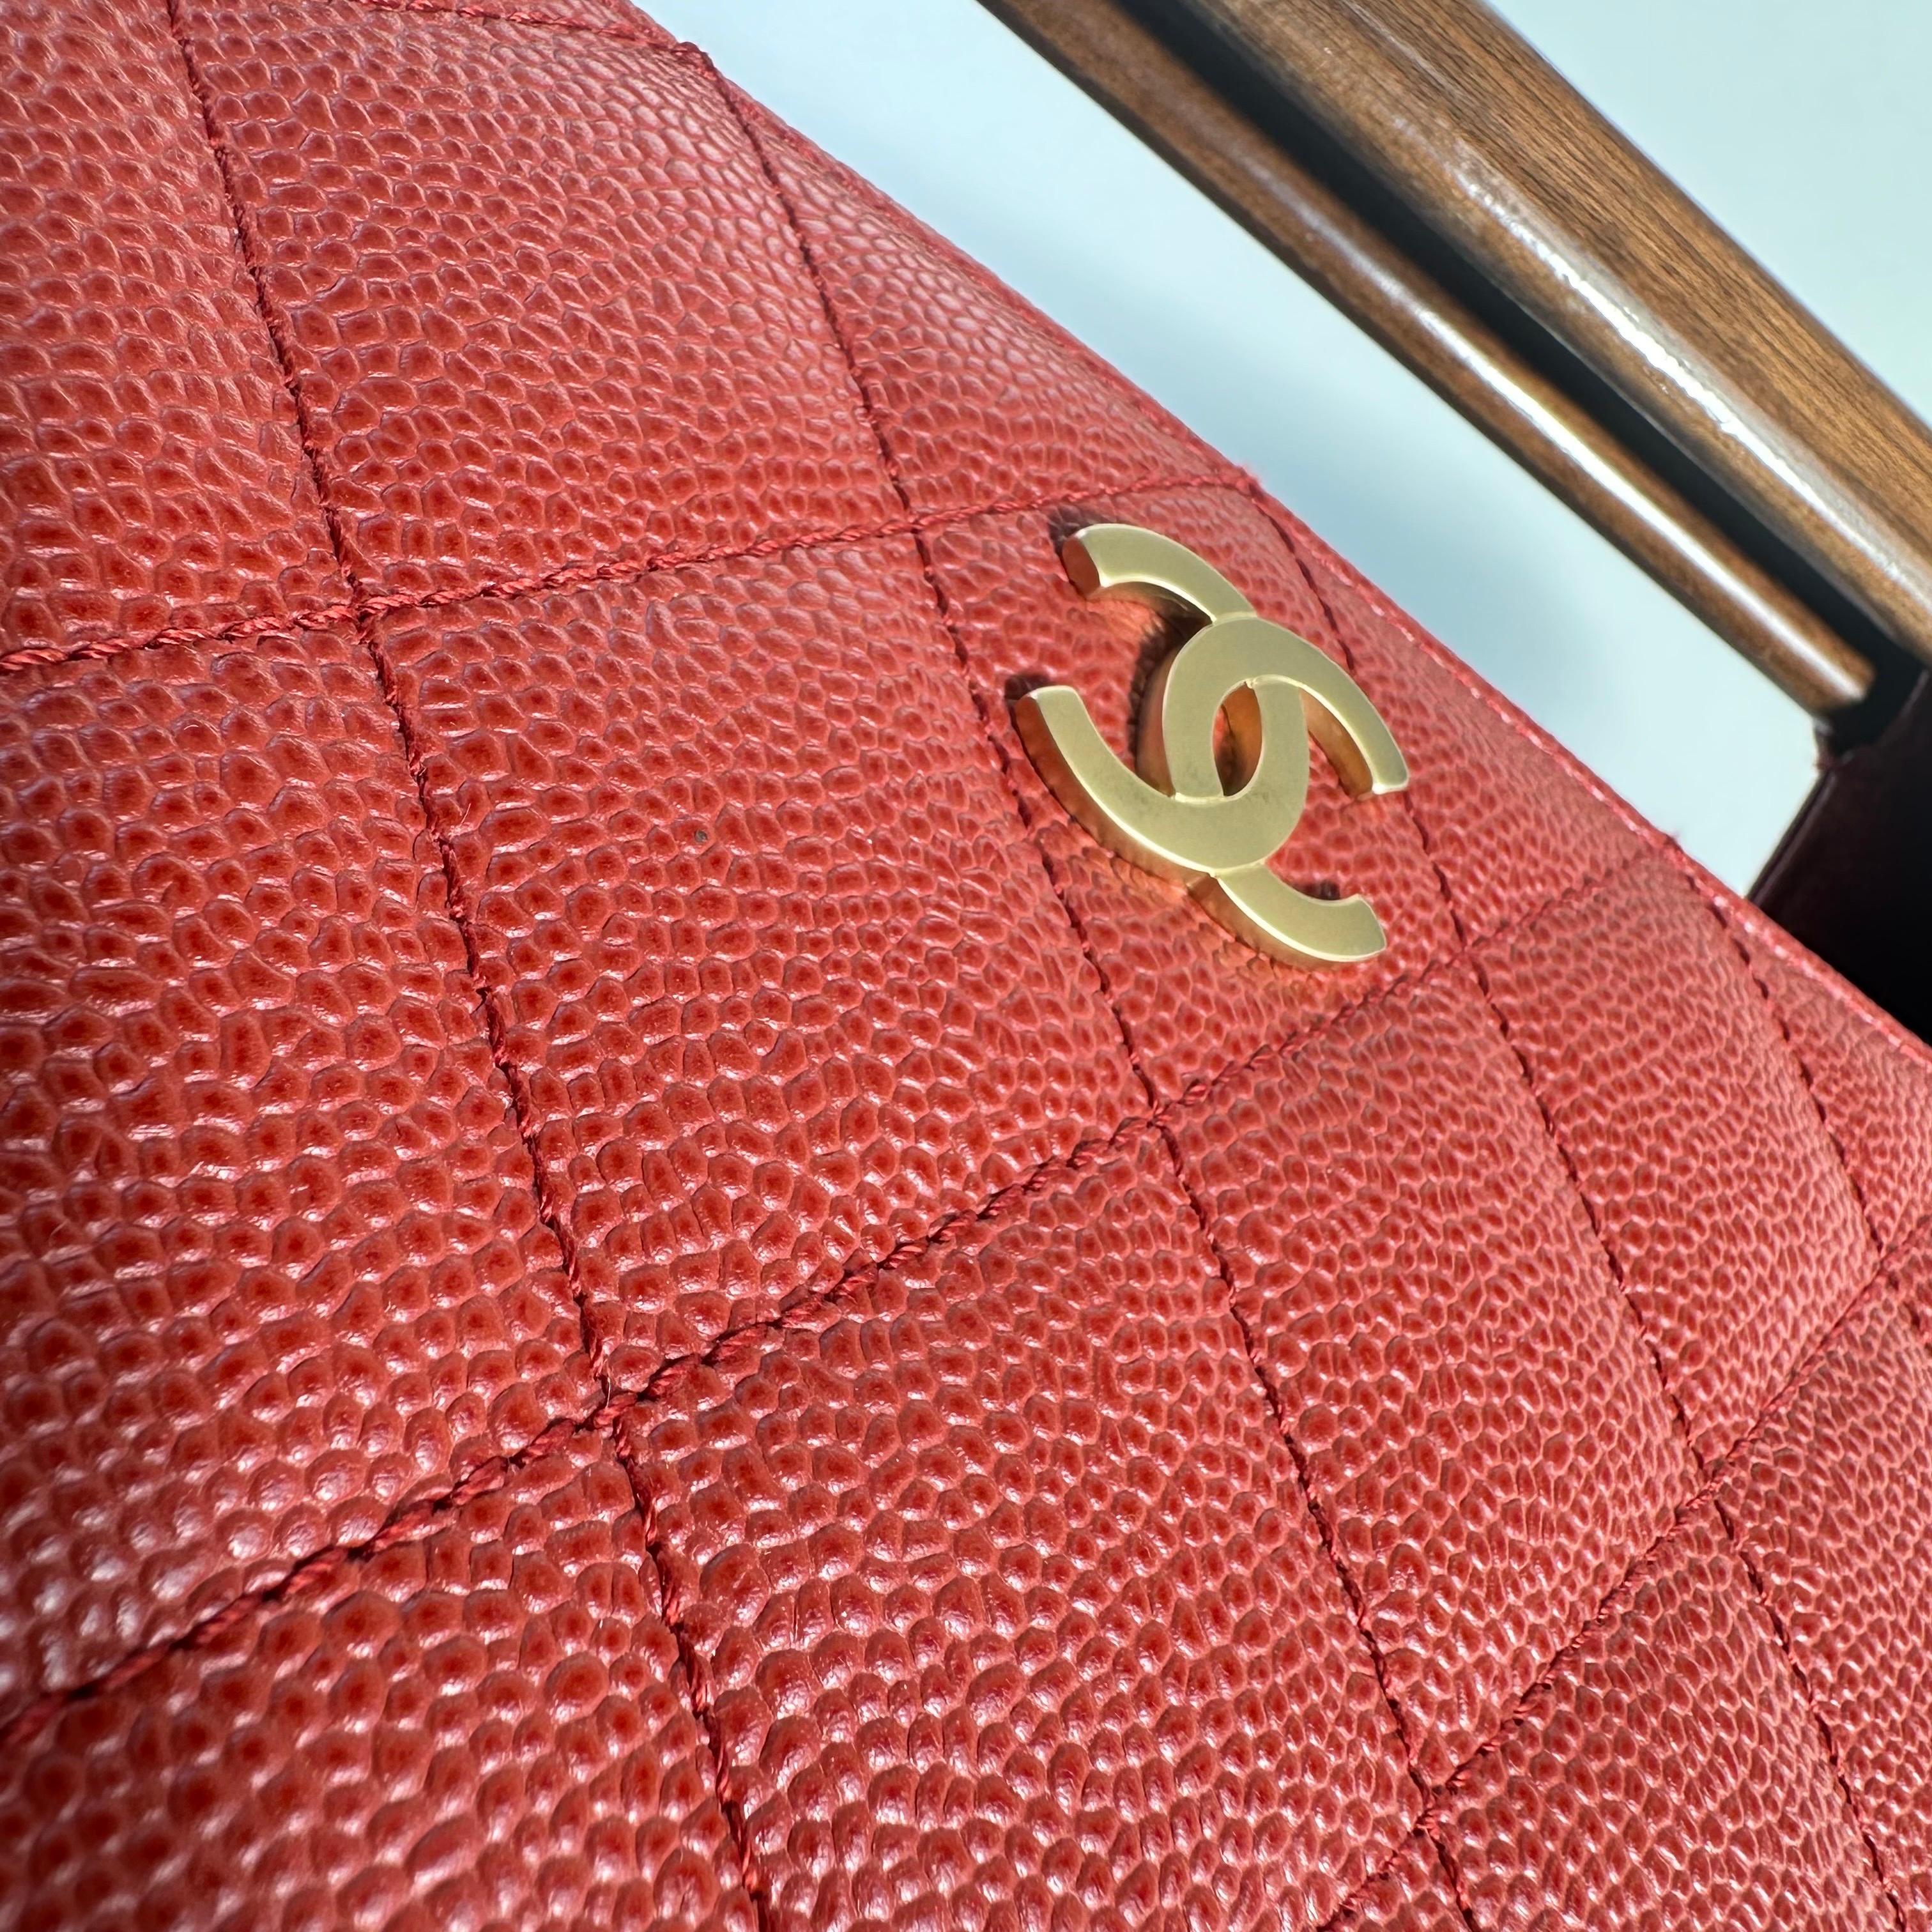 Chanel Wood Top Handle Rare Red Caviar Leather Jumbo Kelly Envelope Clutch Tote

2003 {VINTAGE 20 Years}

Antique gold hardware
Flat bottom
Hidden magnetic snap closure
Deep red leather interior lining
Center zippered pocket
Large additional